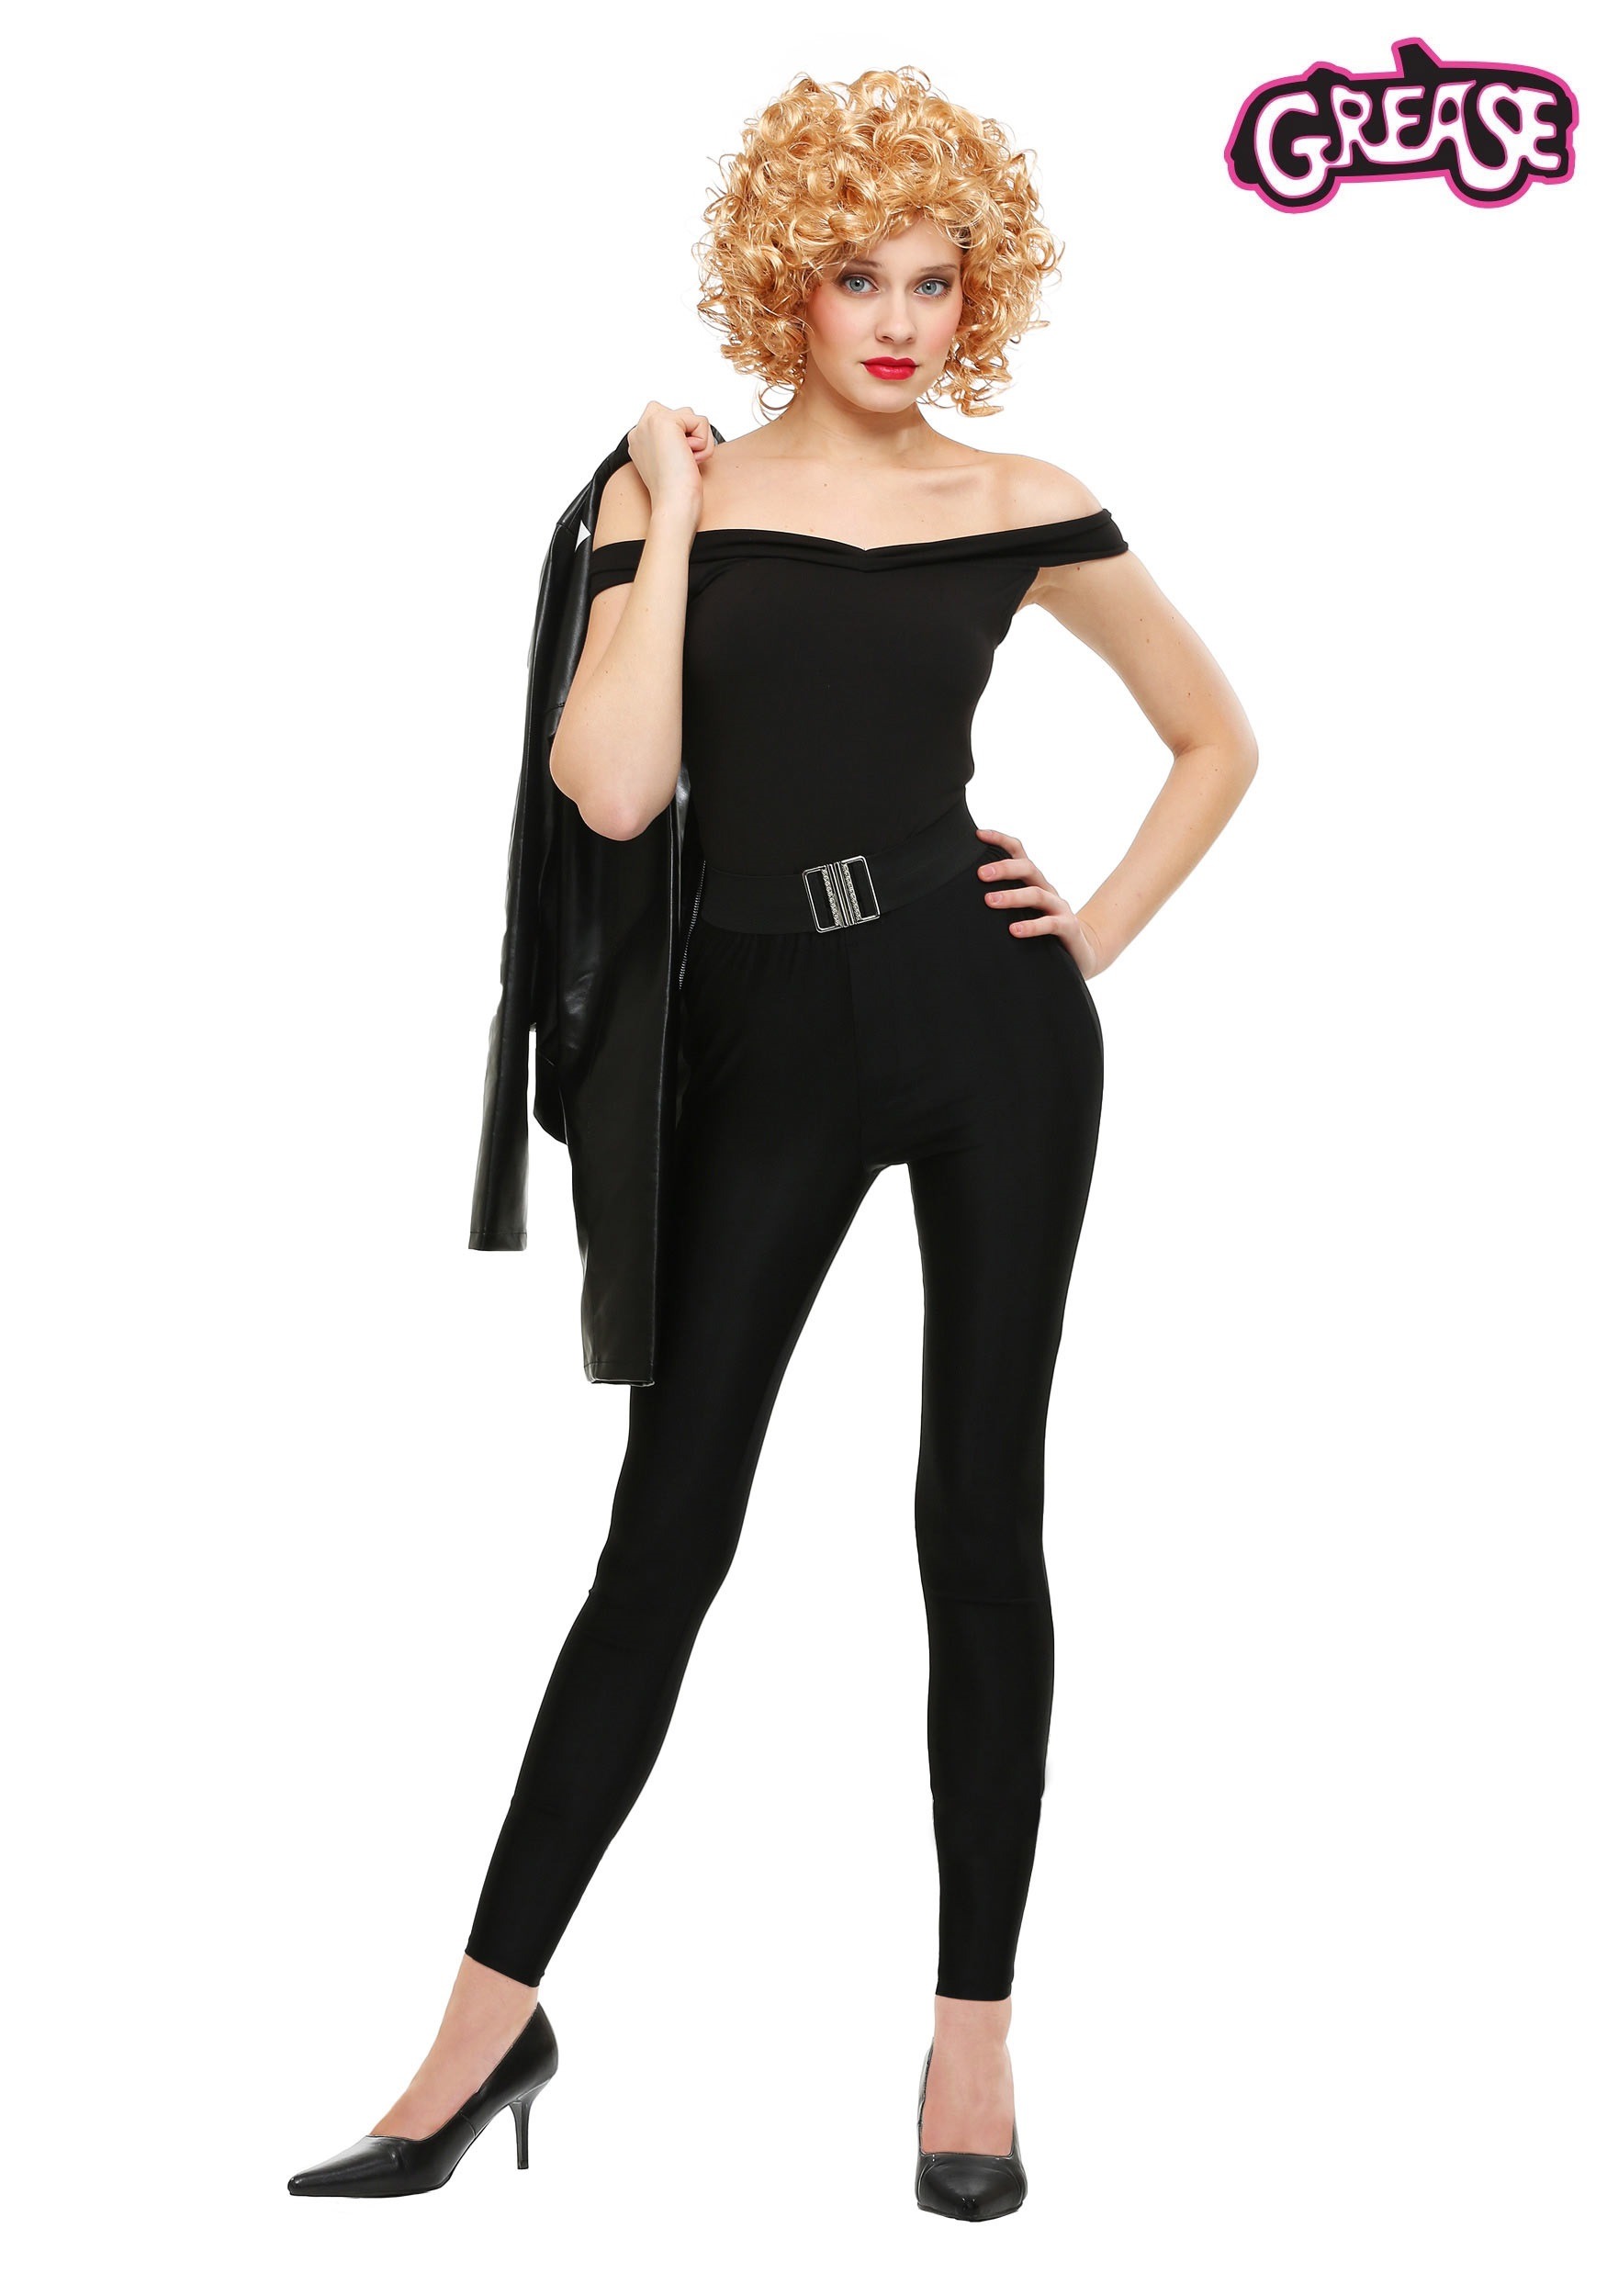 Sandy from Grease costume  Cute halloween costumes, Halloween outfits,  Holloween costume